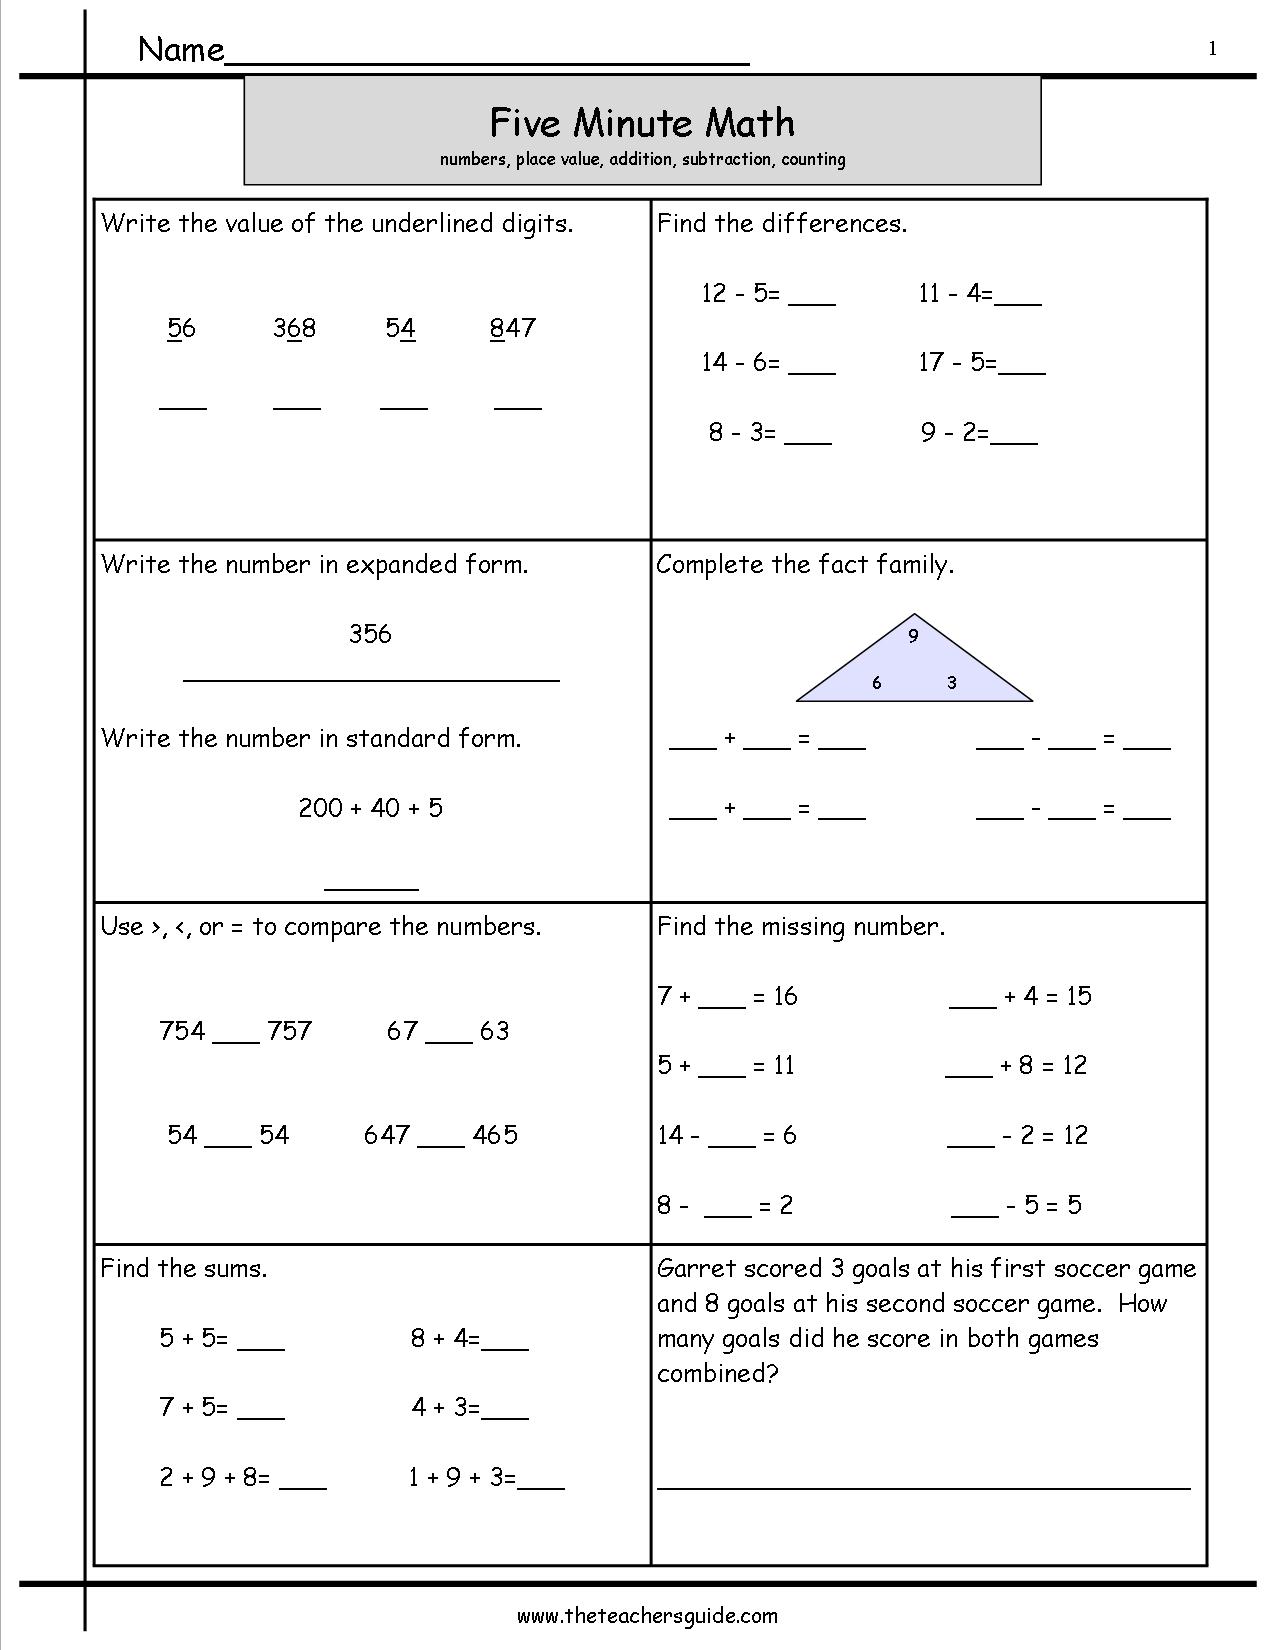 Free Math Printouts from The Teacher's Guide